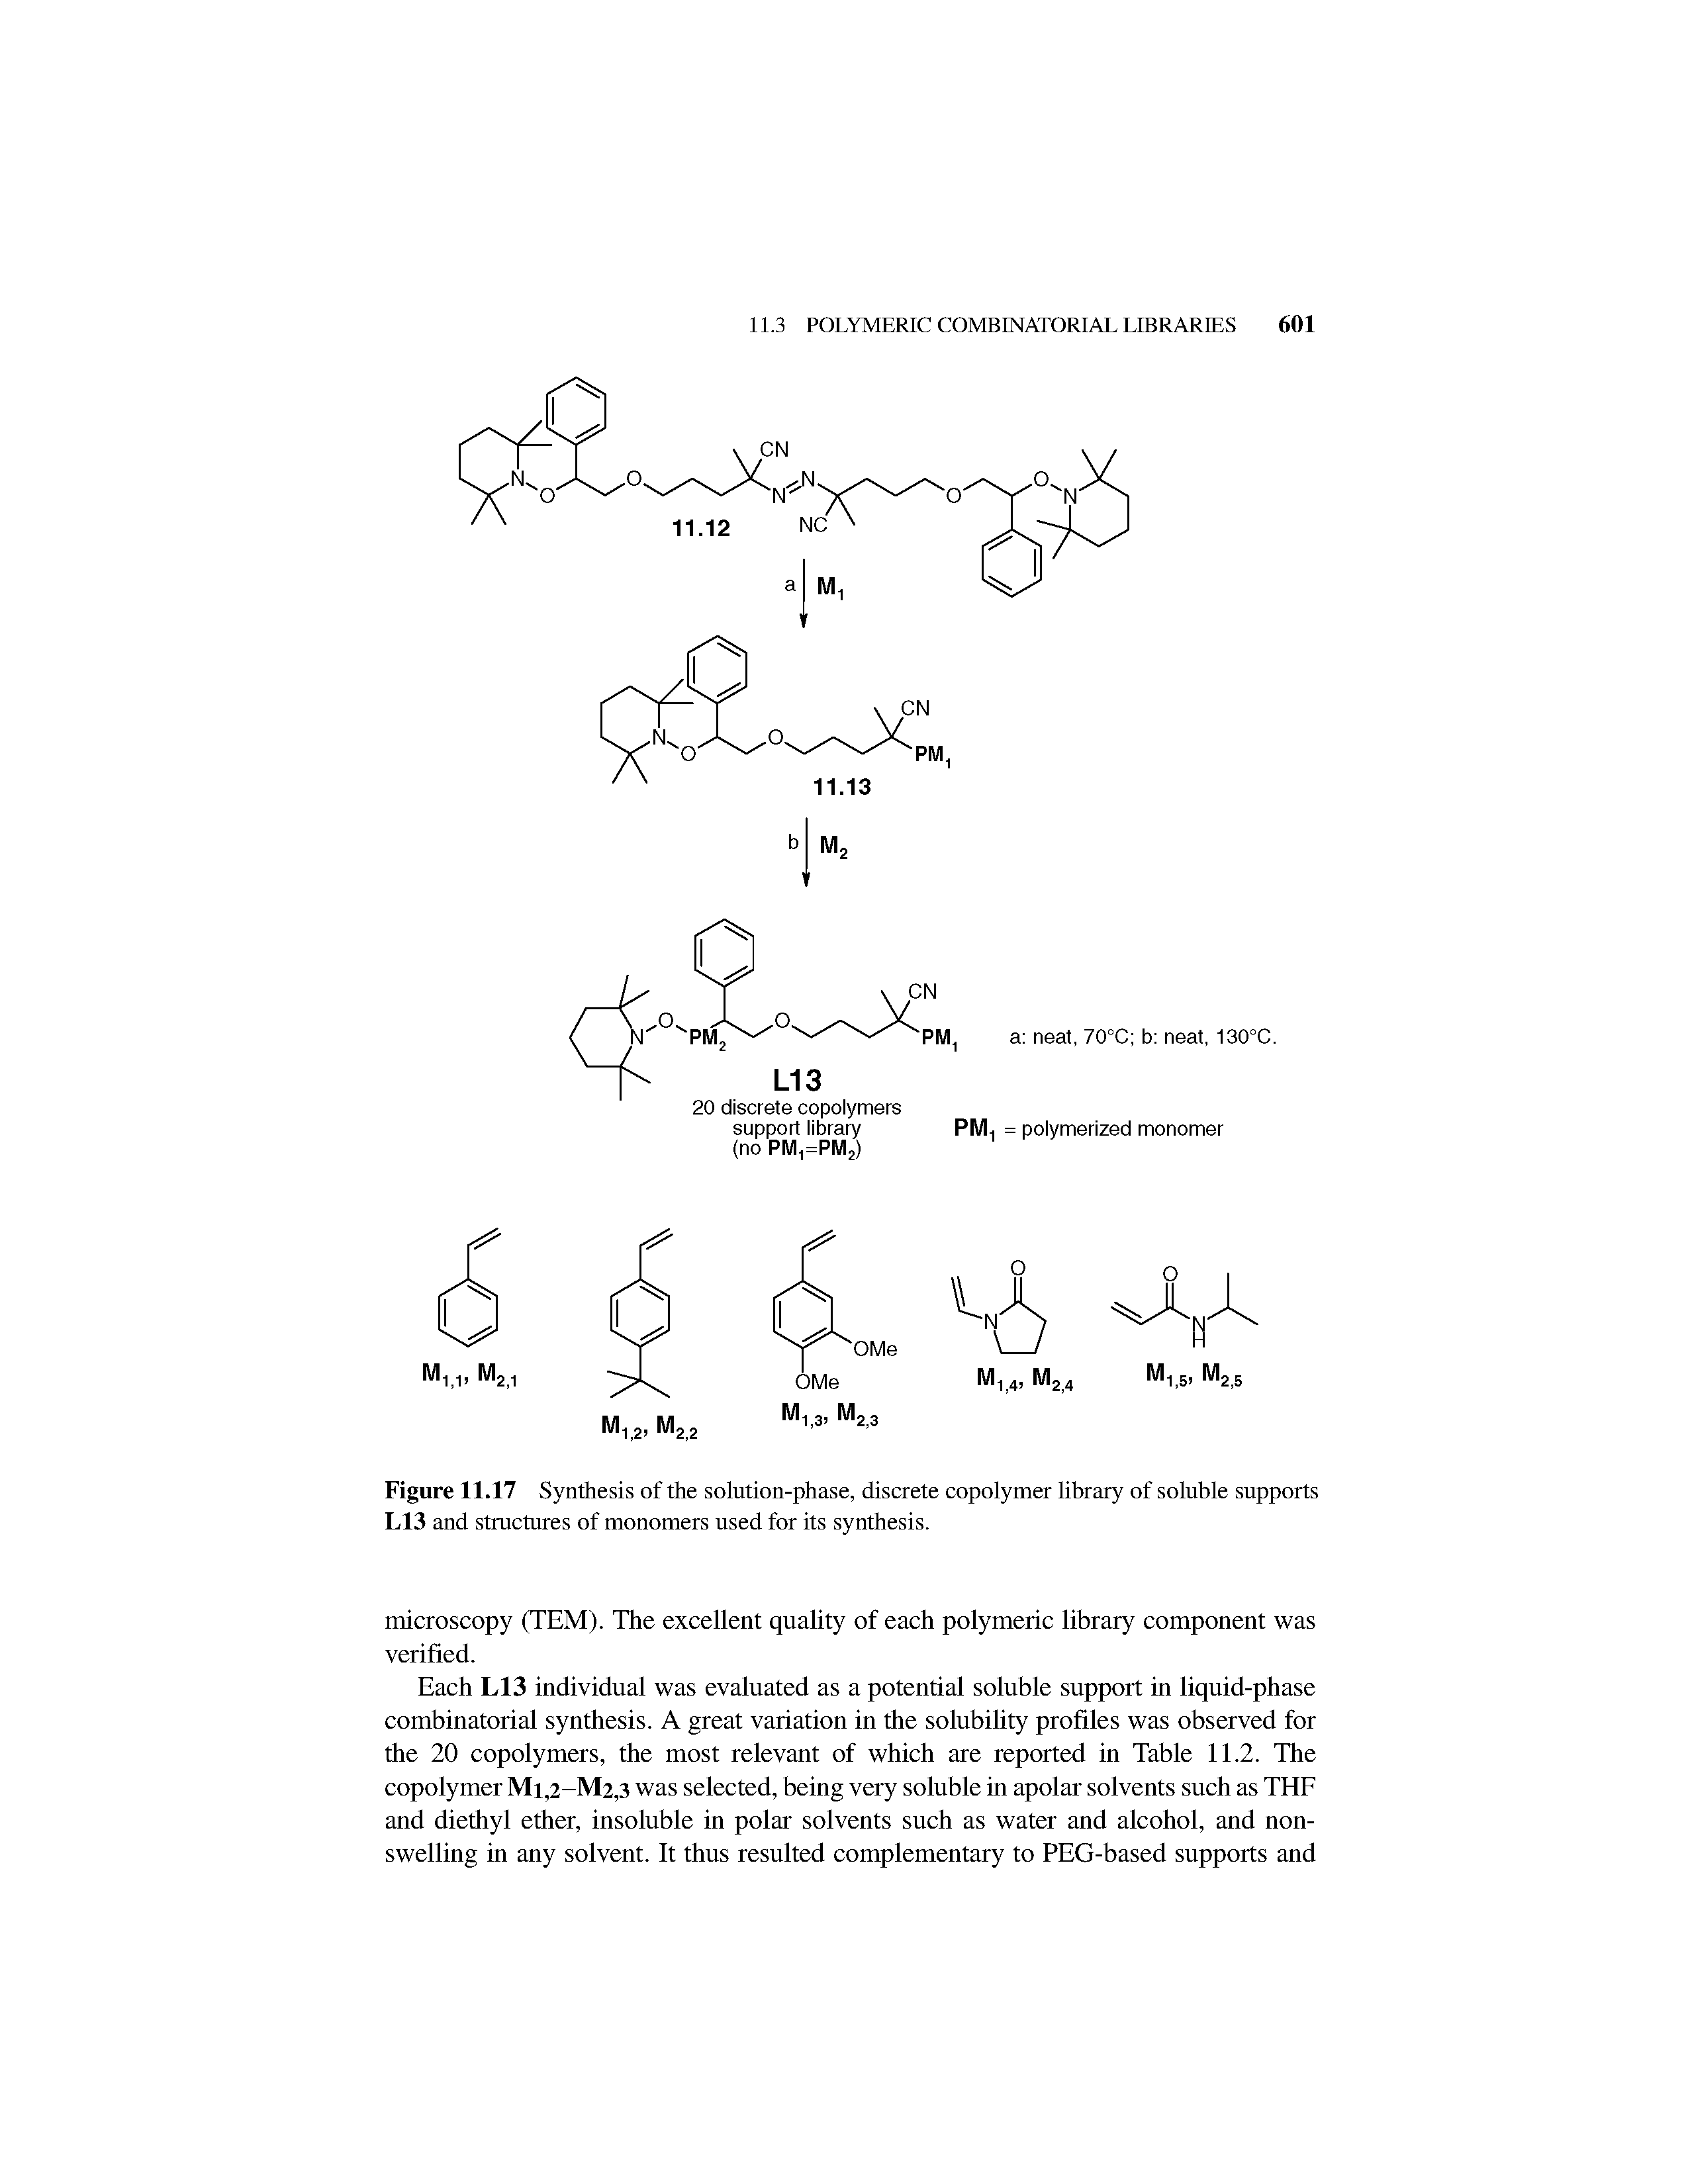 Figure 11.17 Synthesis of the solution-phase, discrete copolymer library of soluble supports L13 and structures of monomers used for its synthesis.